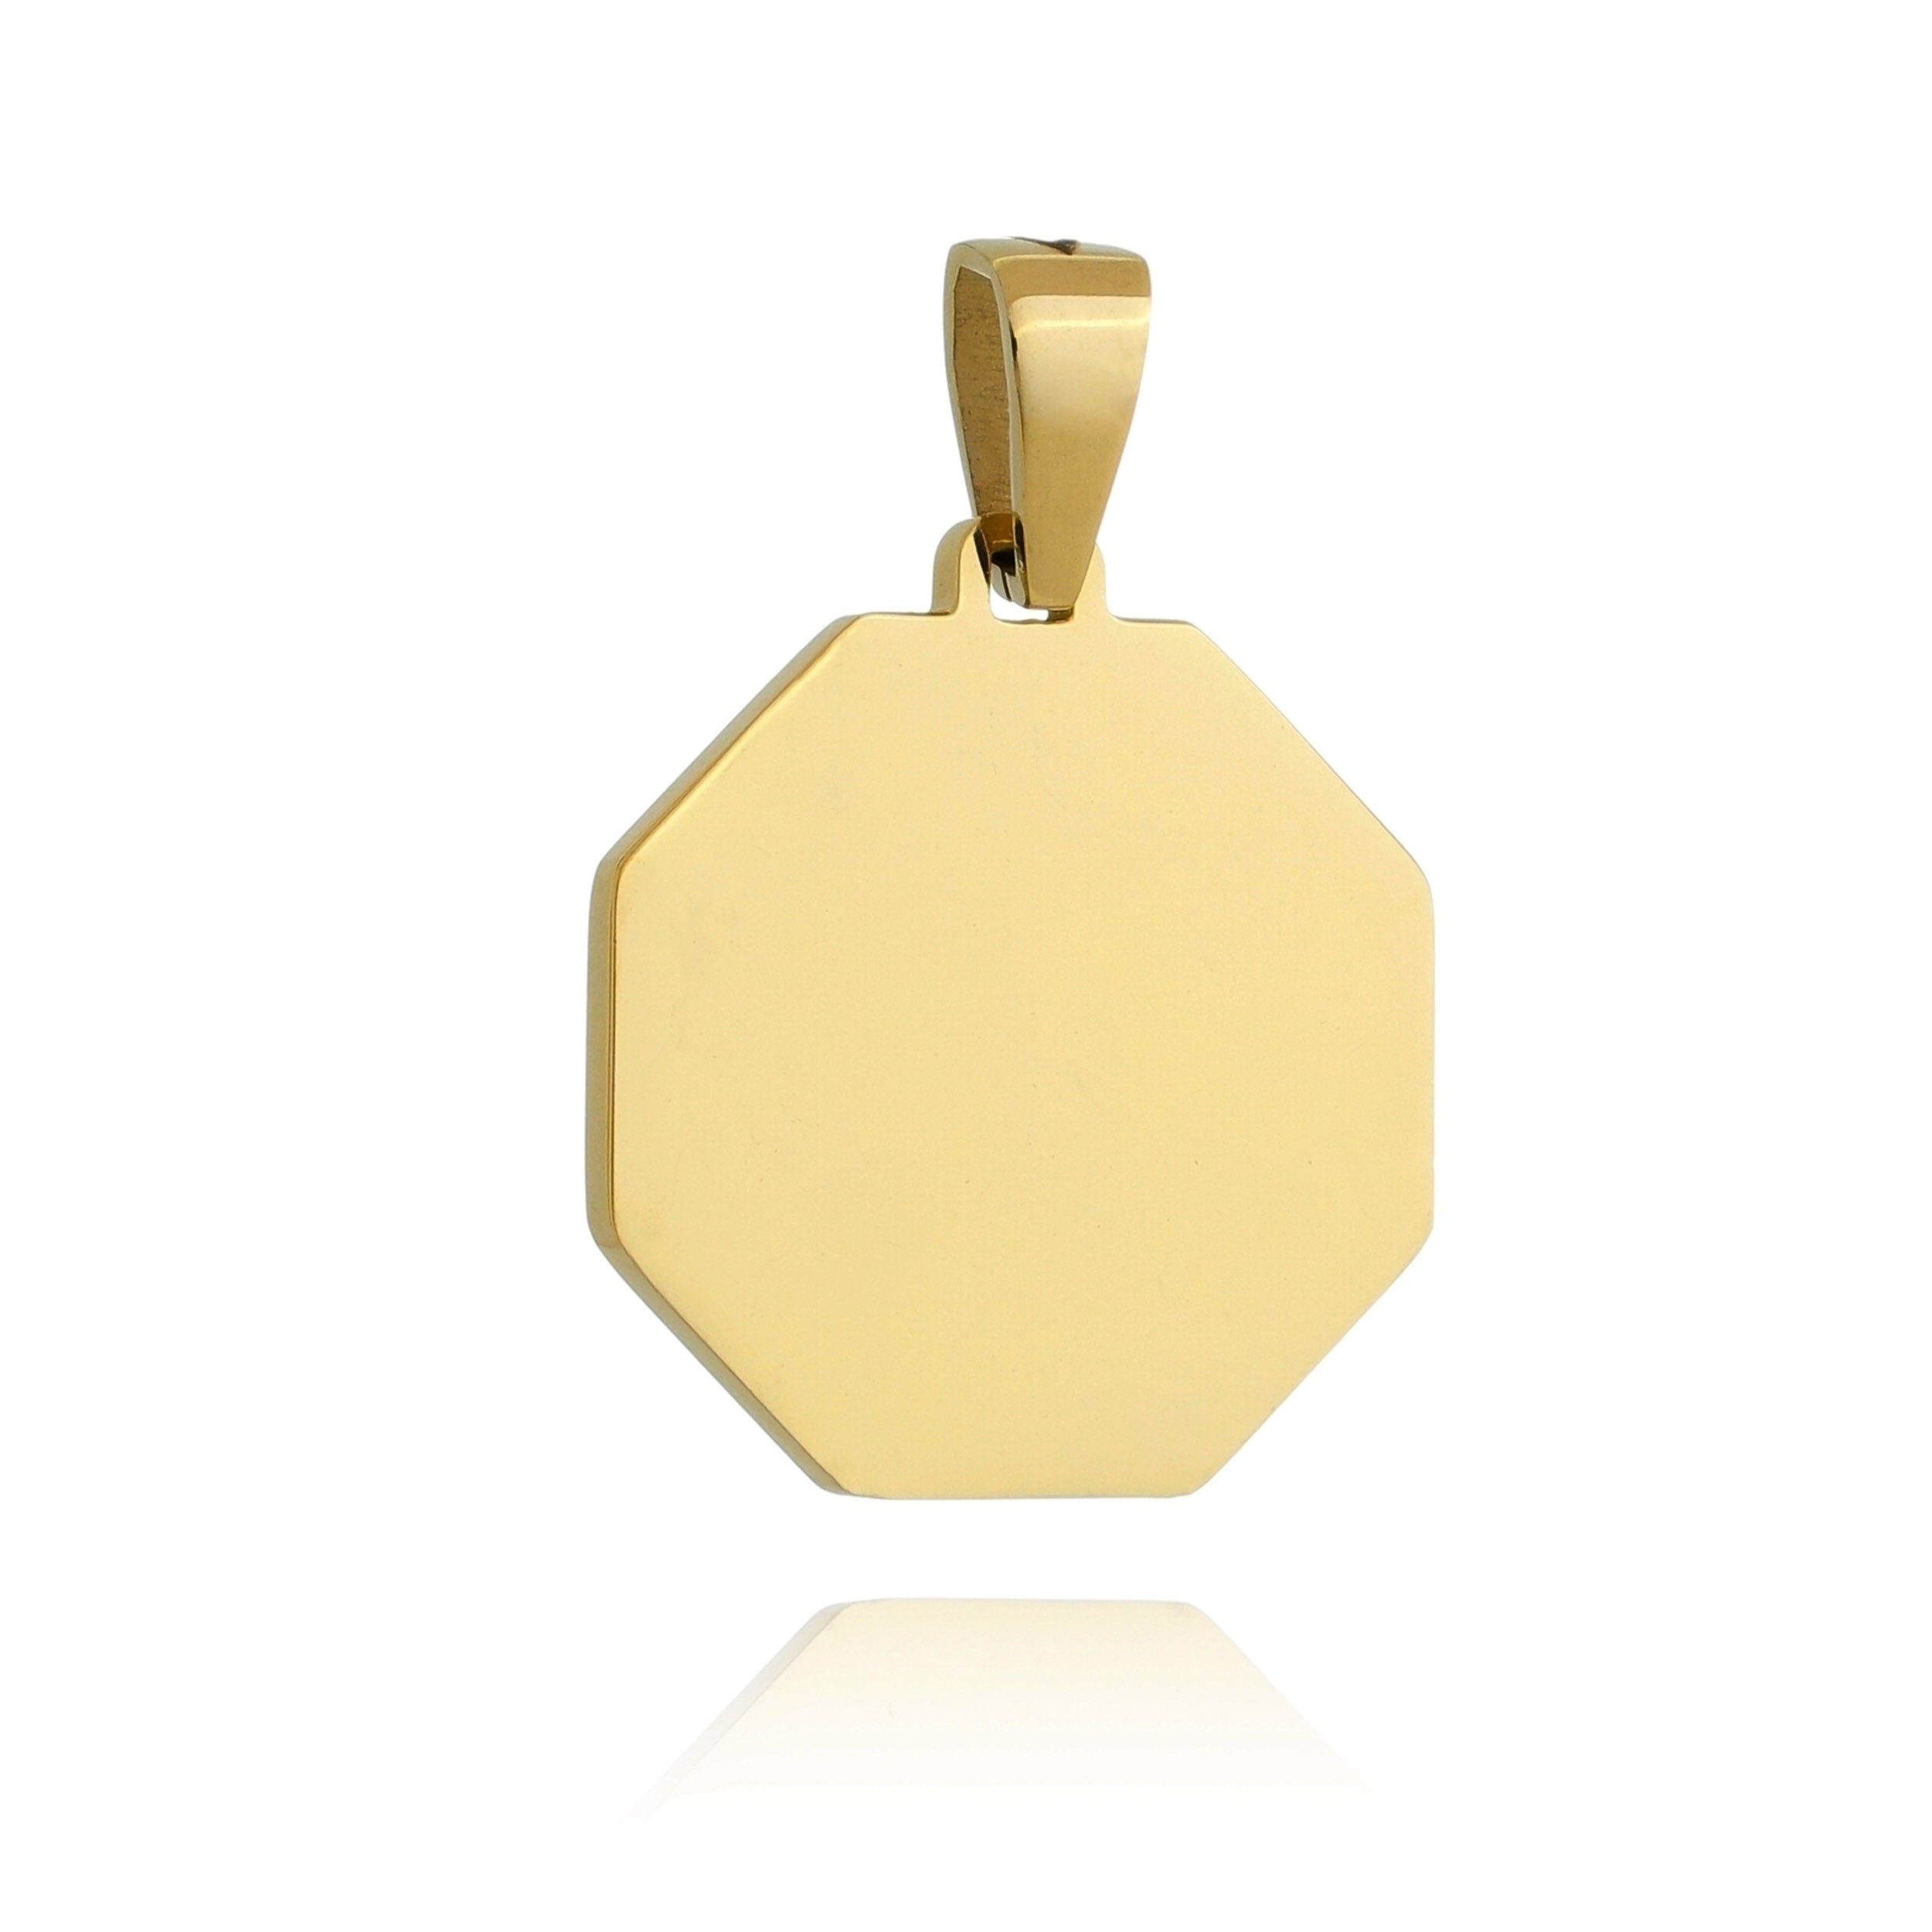 Engravable Octagon Pendent - Premium. We offer this in both 18k Gold and Stainless Steel.